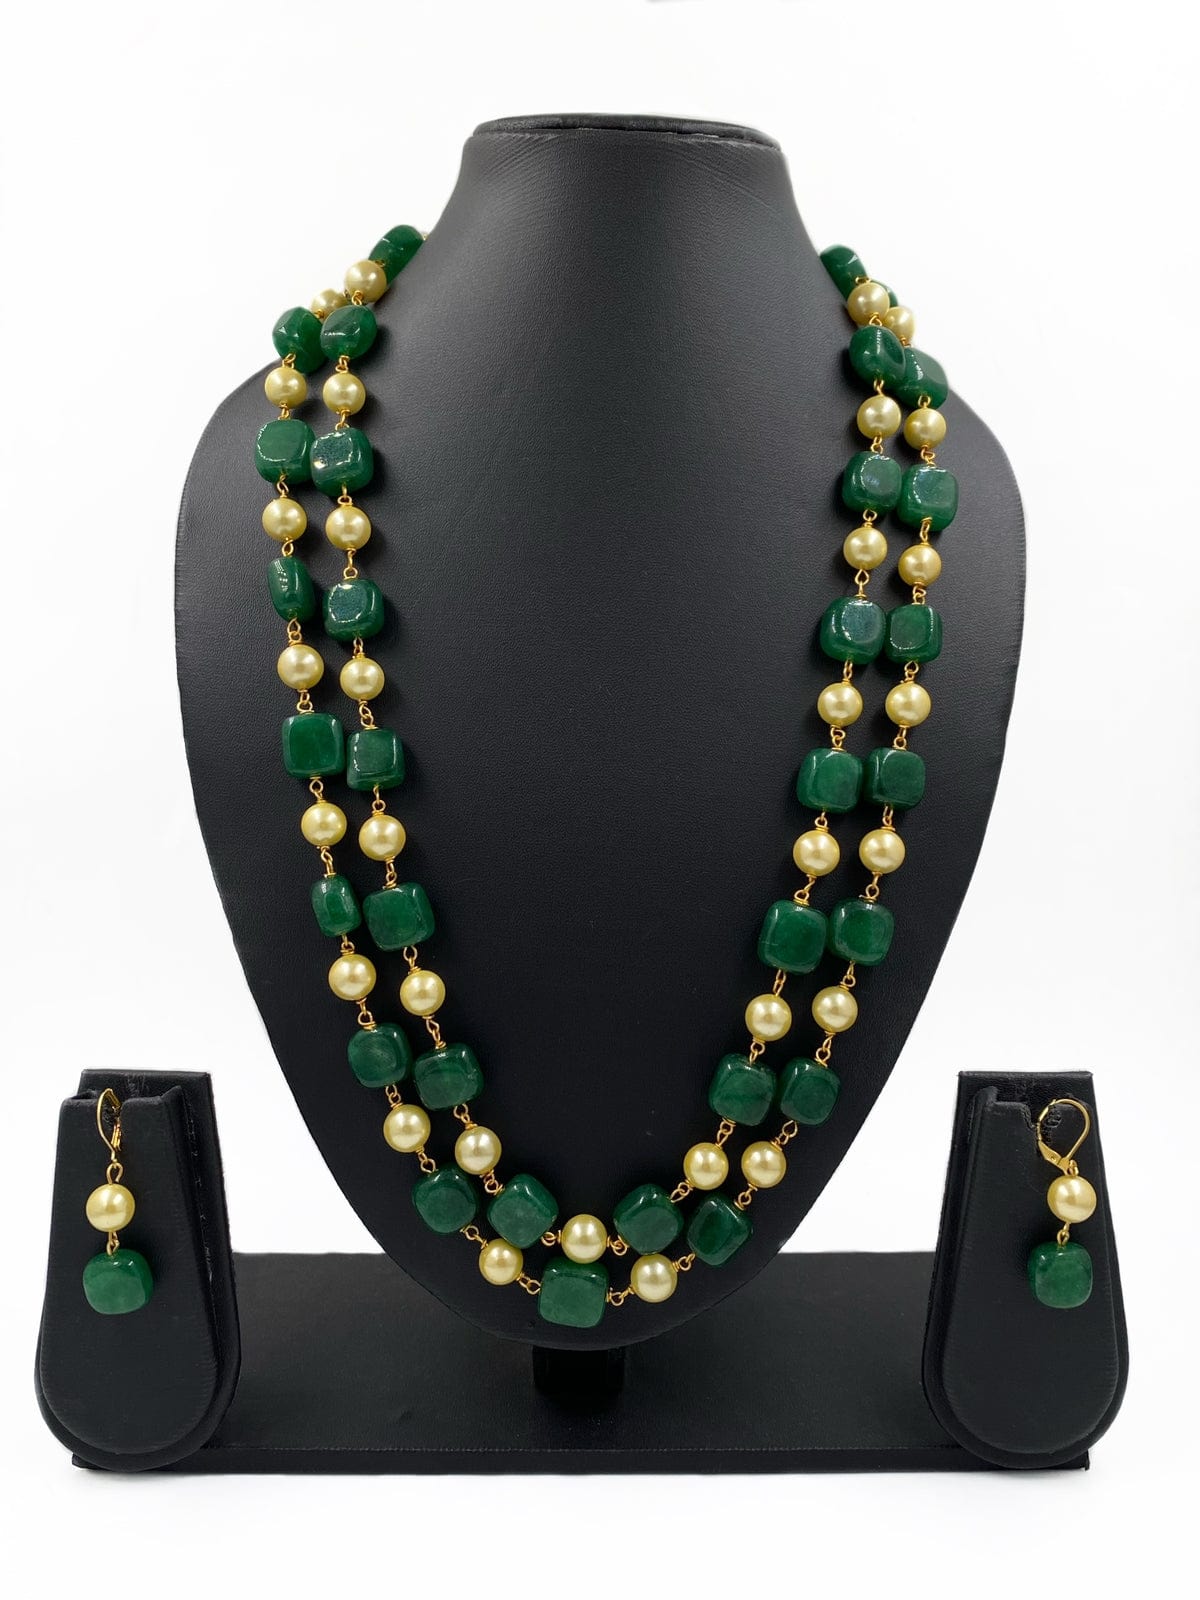 Semi Precious Double Layered Green Jade Beads Necklace By Gehna Shop Beads Jewellery